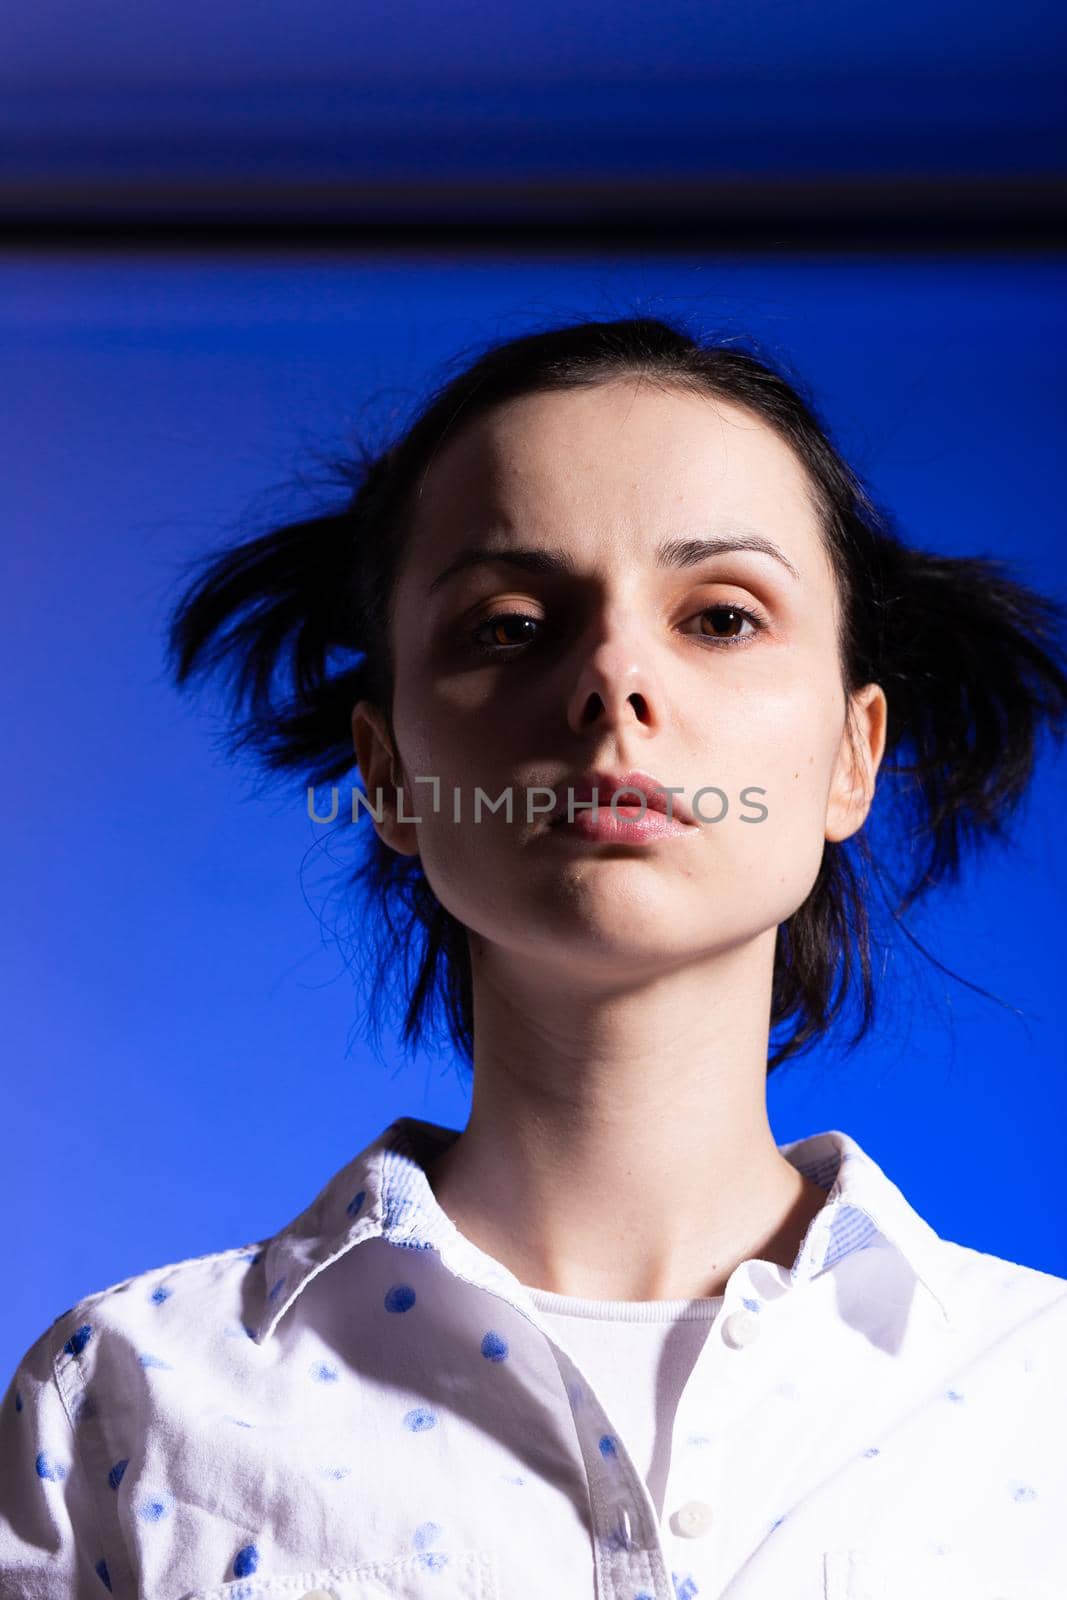 brunette woman in a white shirt with polka dots, on a blue background by shilovskaya